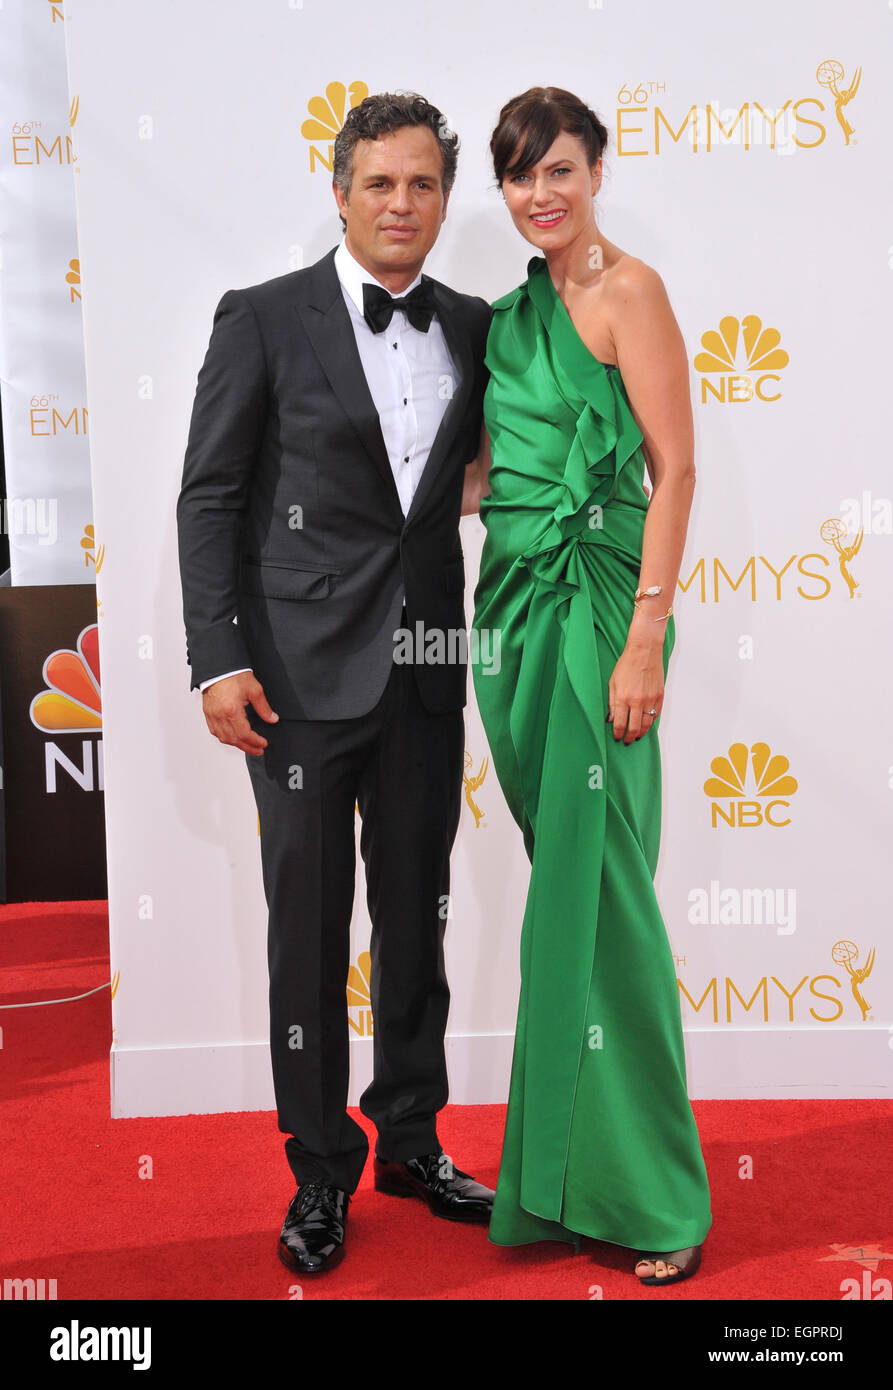 LOS ANGELES, CA - AUGUST 25, 2014: Mark Ruffalo & wife Sunrise Coigney at the 66th Primetime Emmy Awards at the Nokia Theatre L.A. Live downtown Los Angeles. Stock Photo